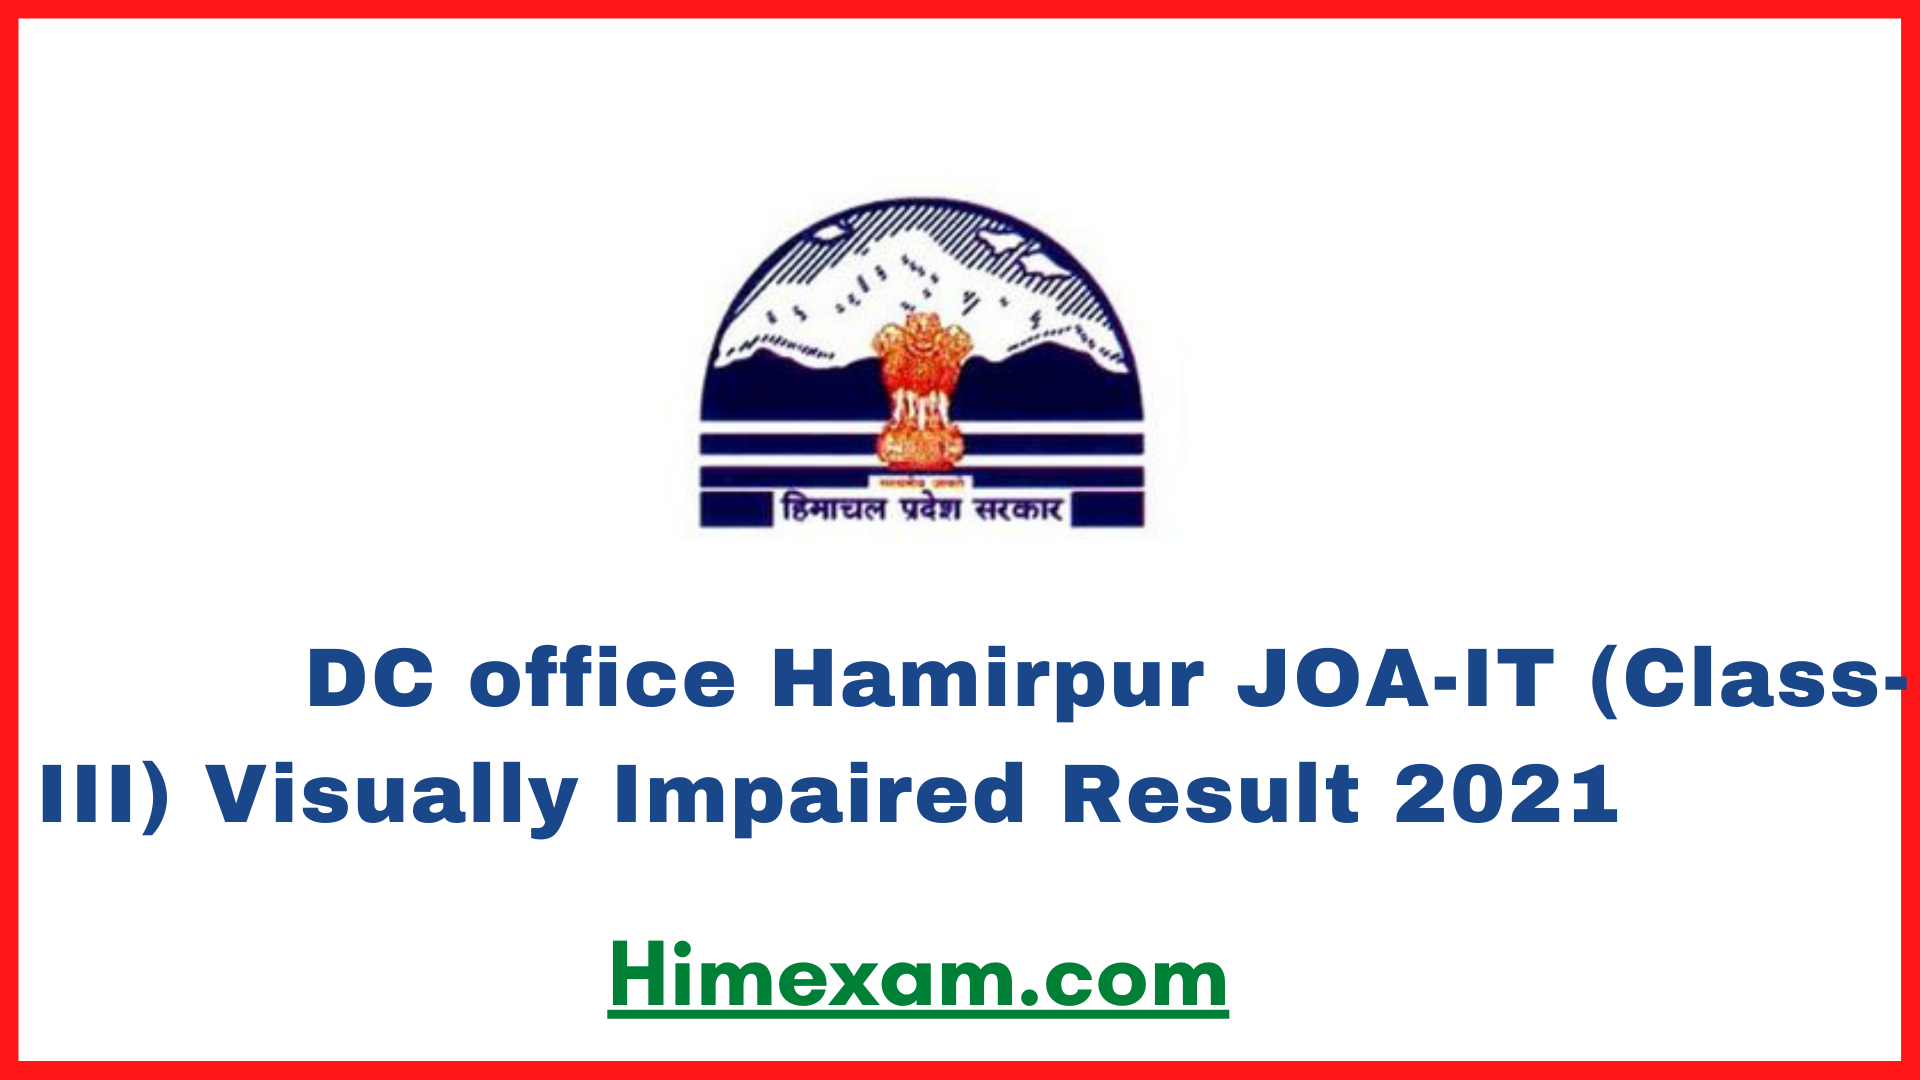 DC office Hamirpur JOA-IT (Class-III) Visually Impaired Result 2021